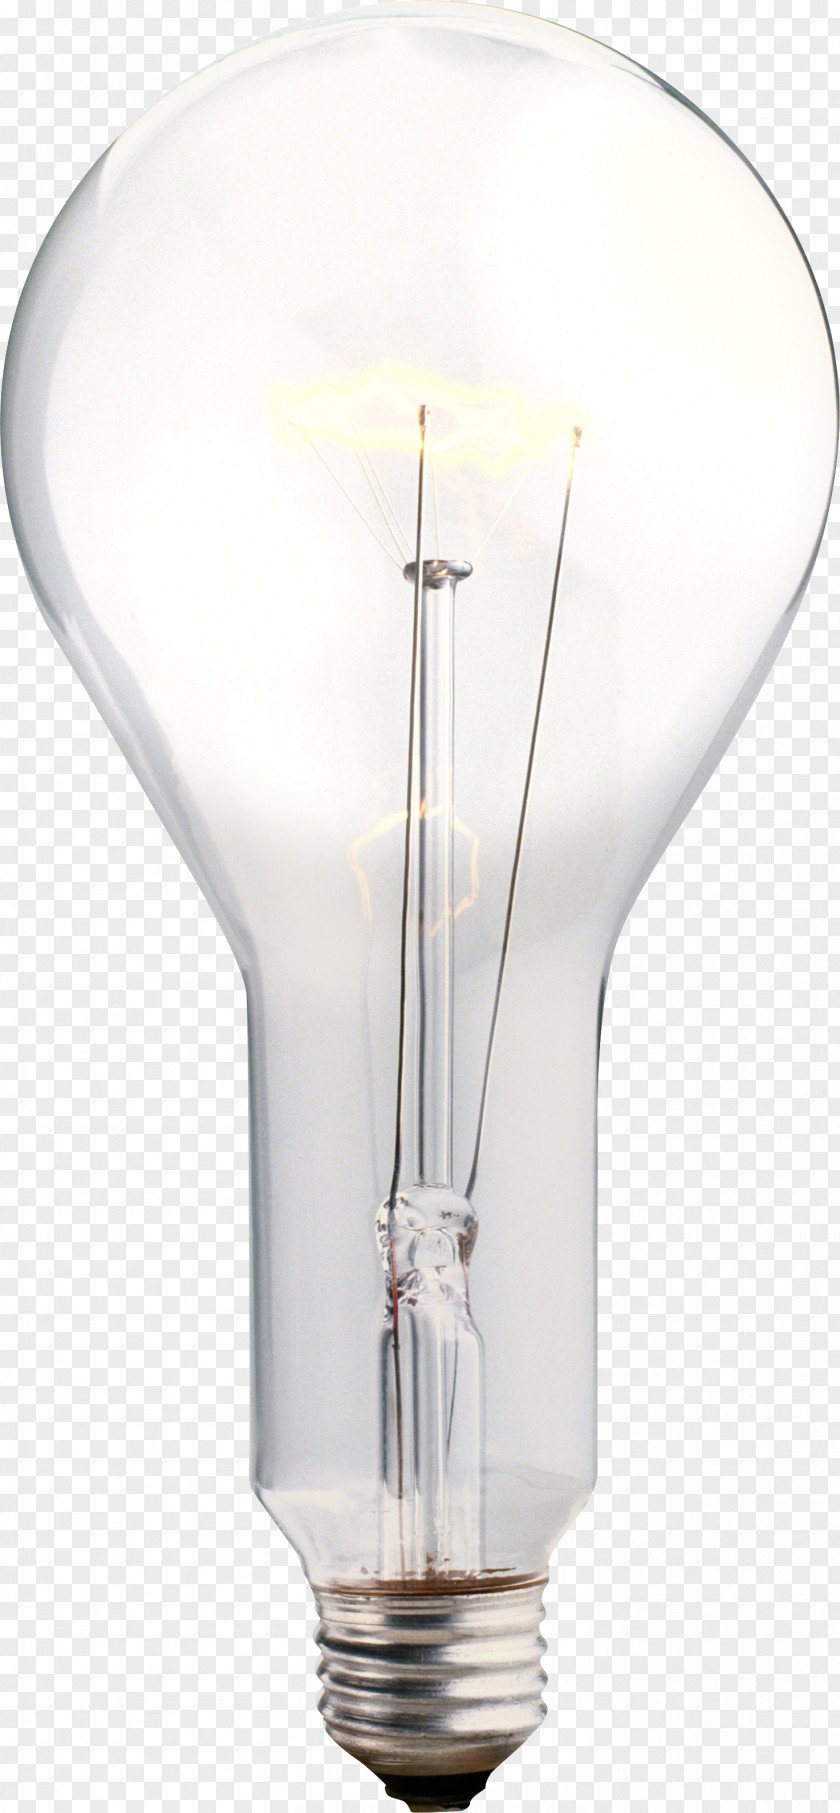 Lamp Image Incandescent Light Bulb Electric PNG